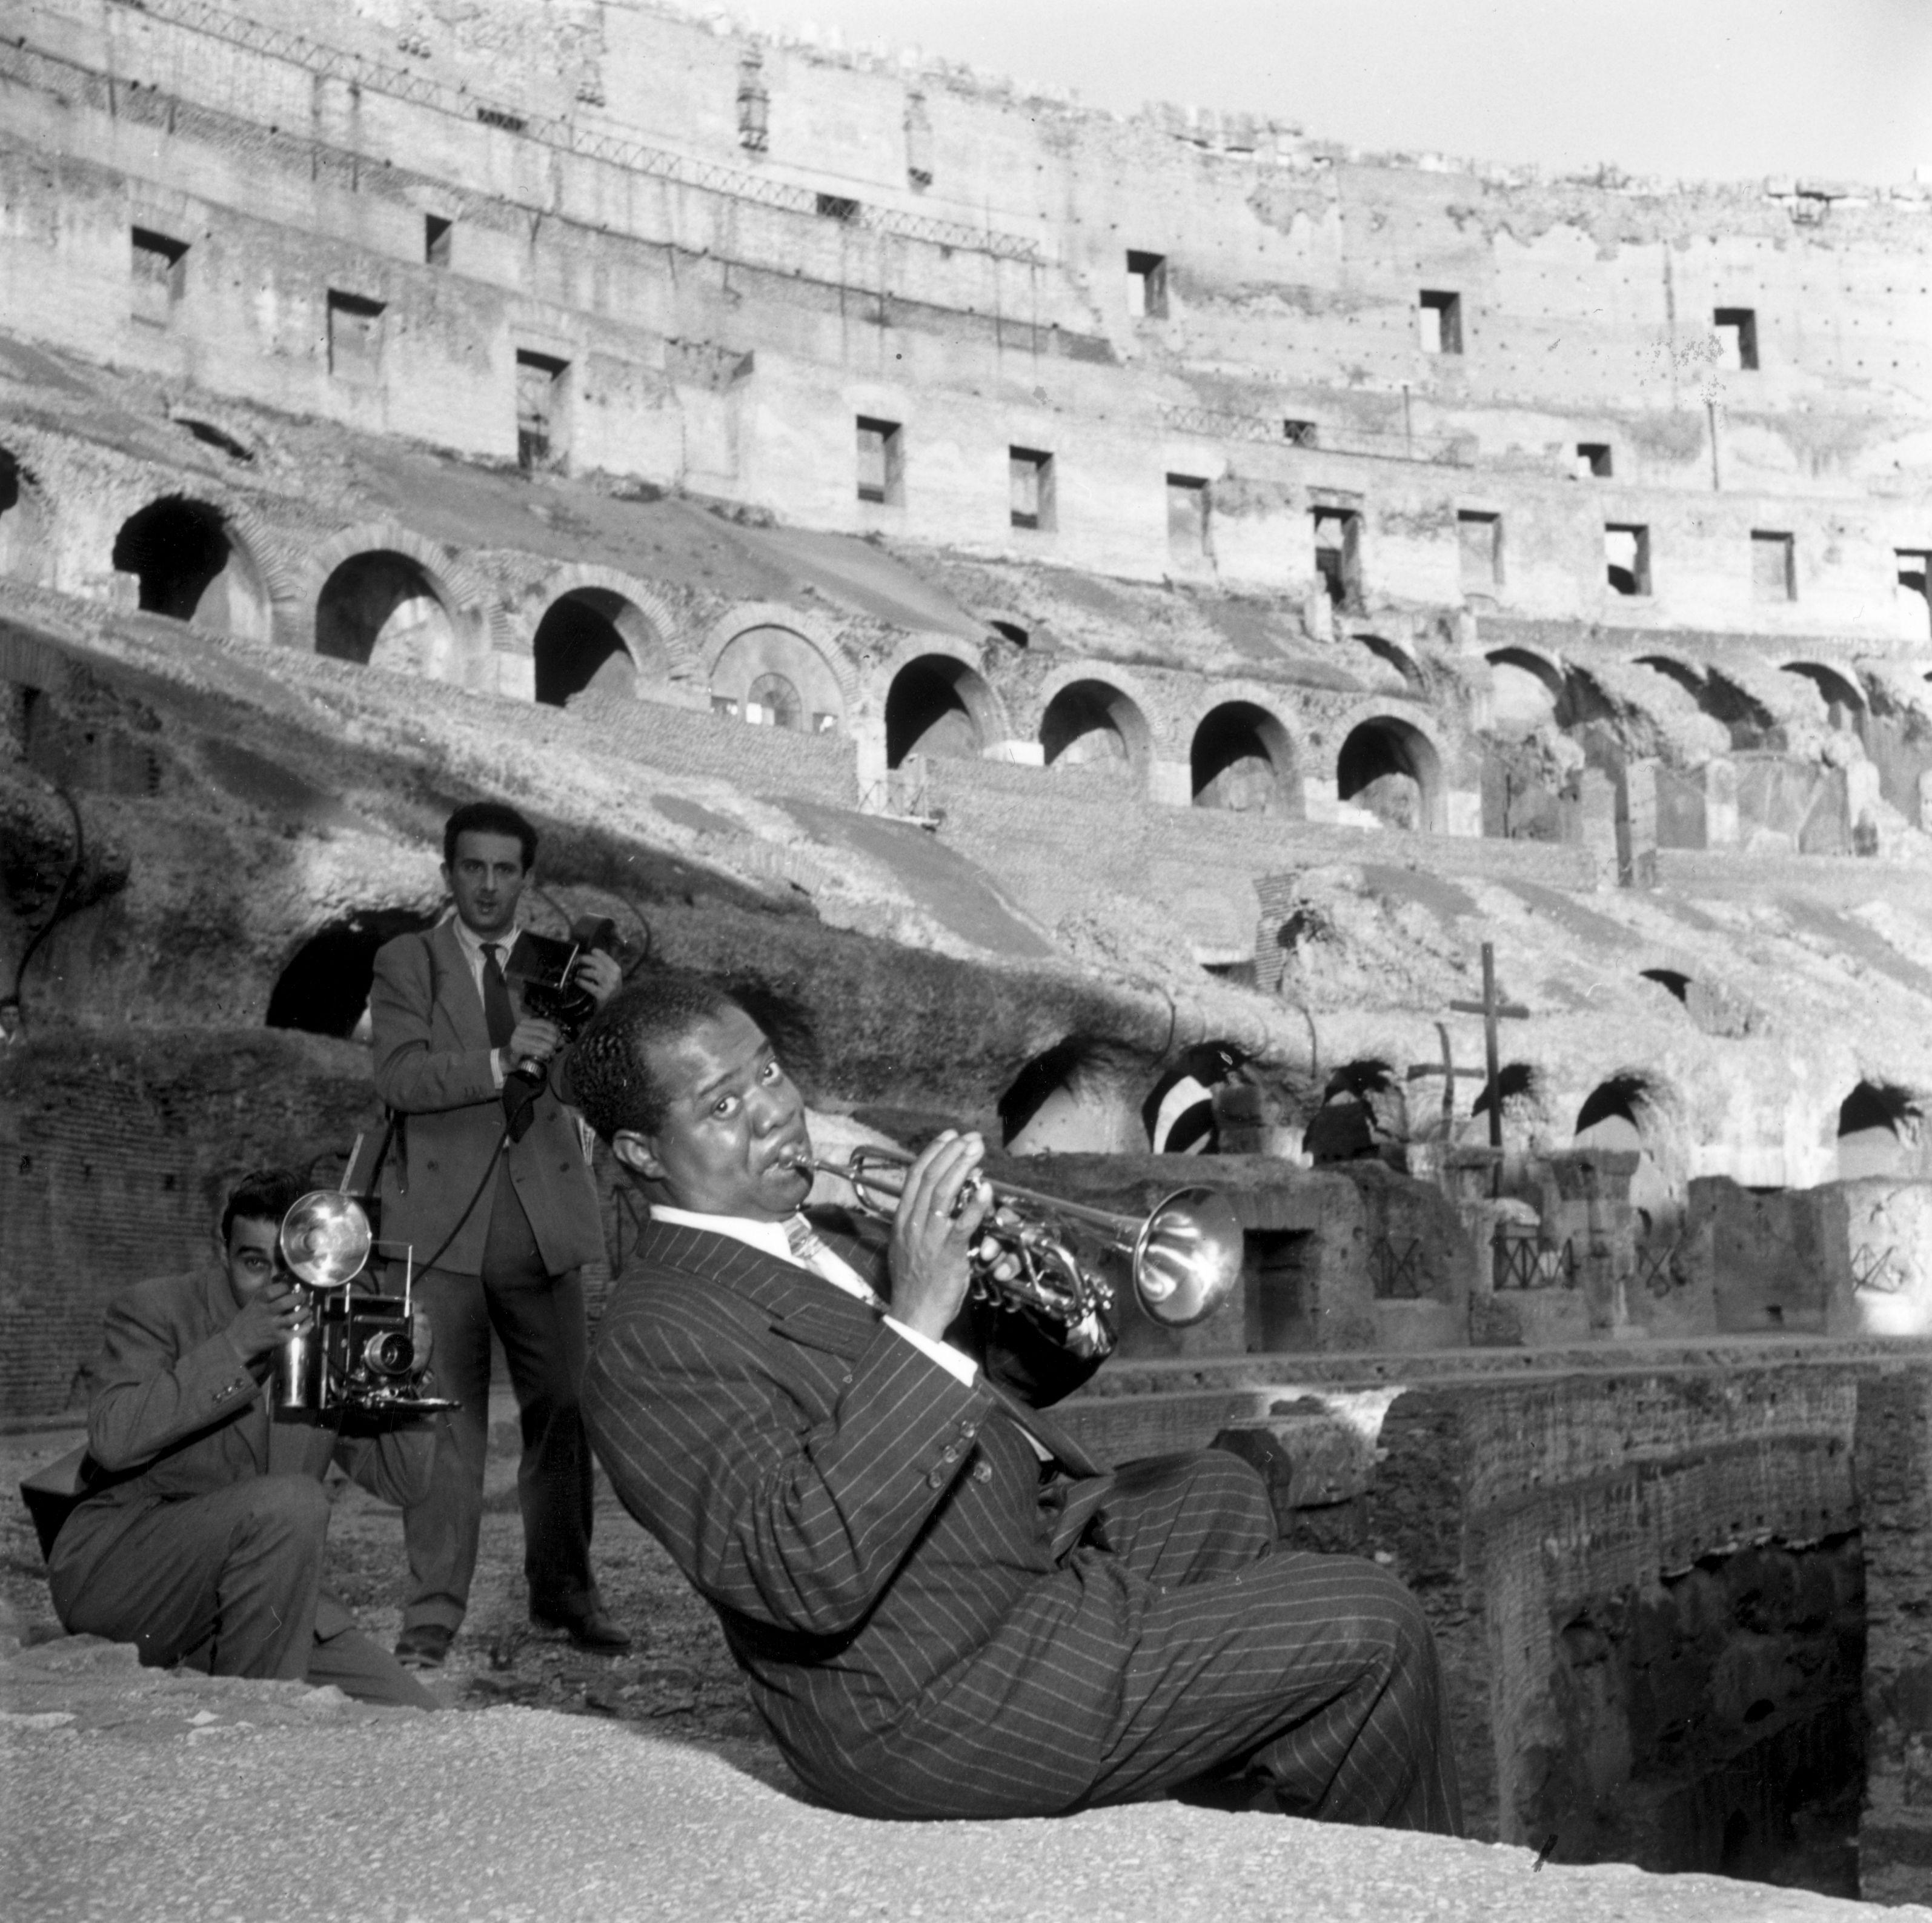 Slim Aarons Black and White Photograph - The King of Jazz, Louis Armstrong in Rome, Black and White Estate Edition